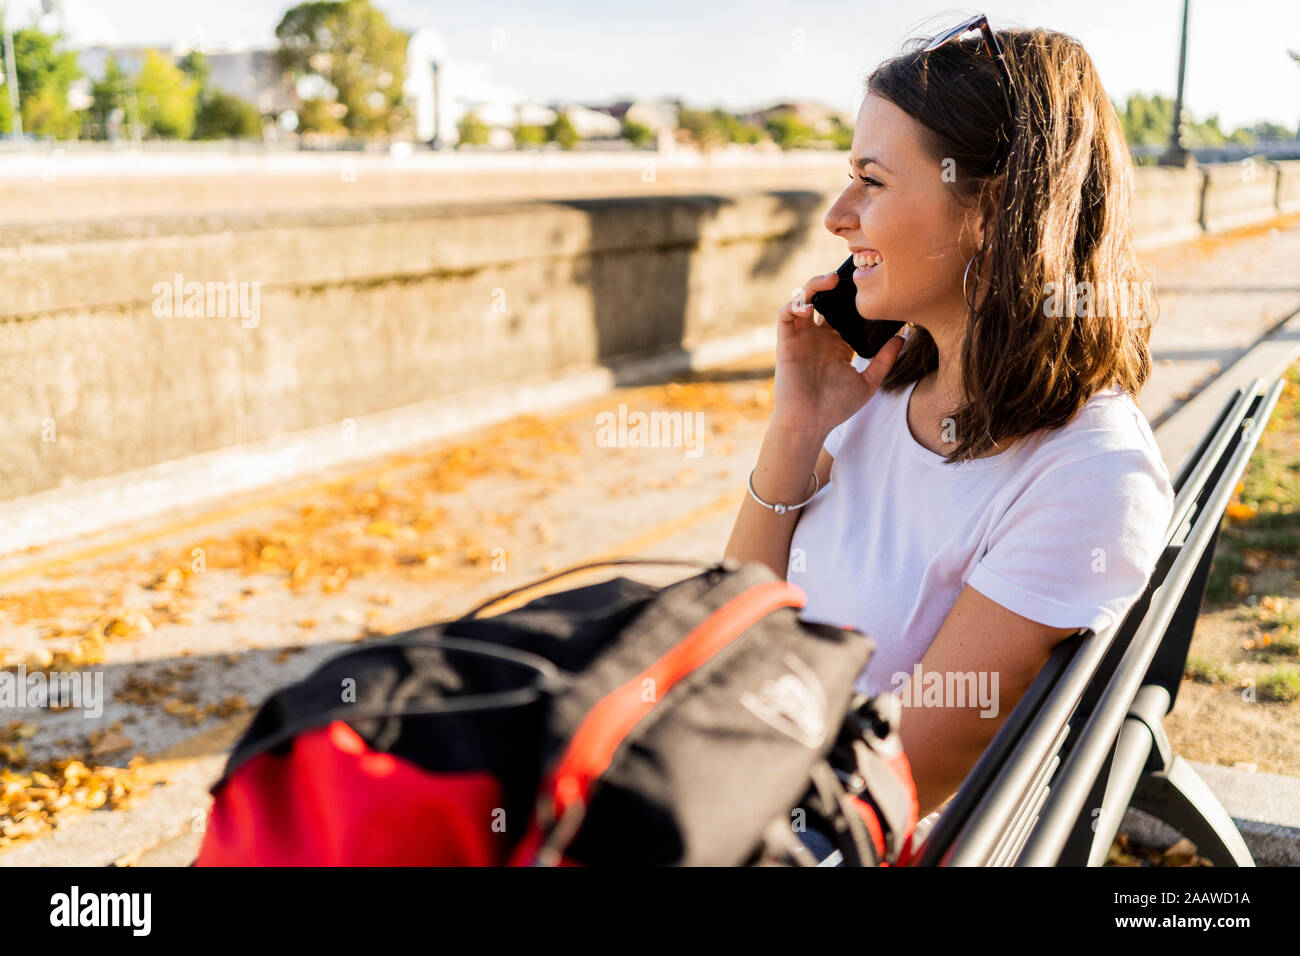 Young female backpacker with red backpack using smartphone, sitting on a benach in Verona, Italy Stock Photo